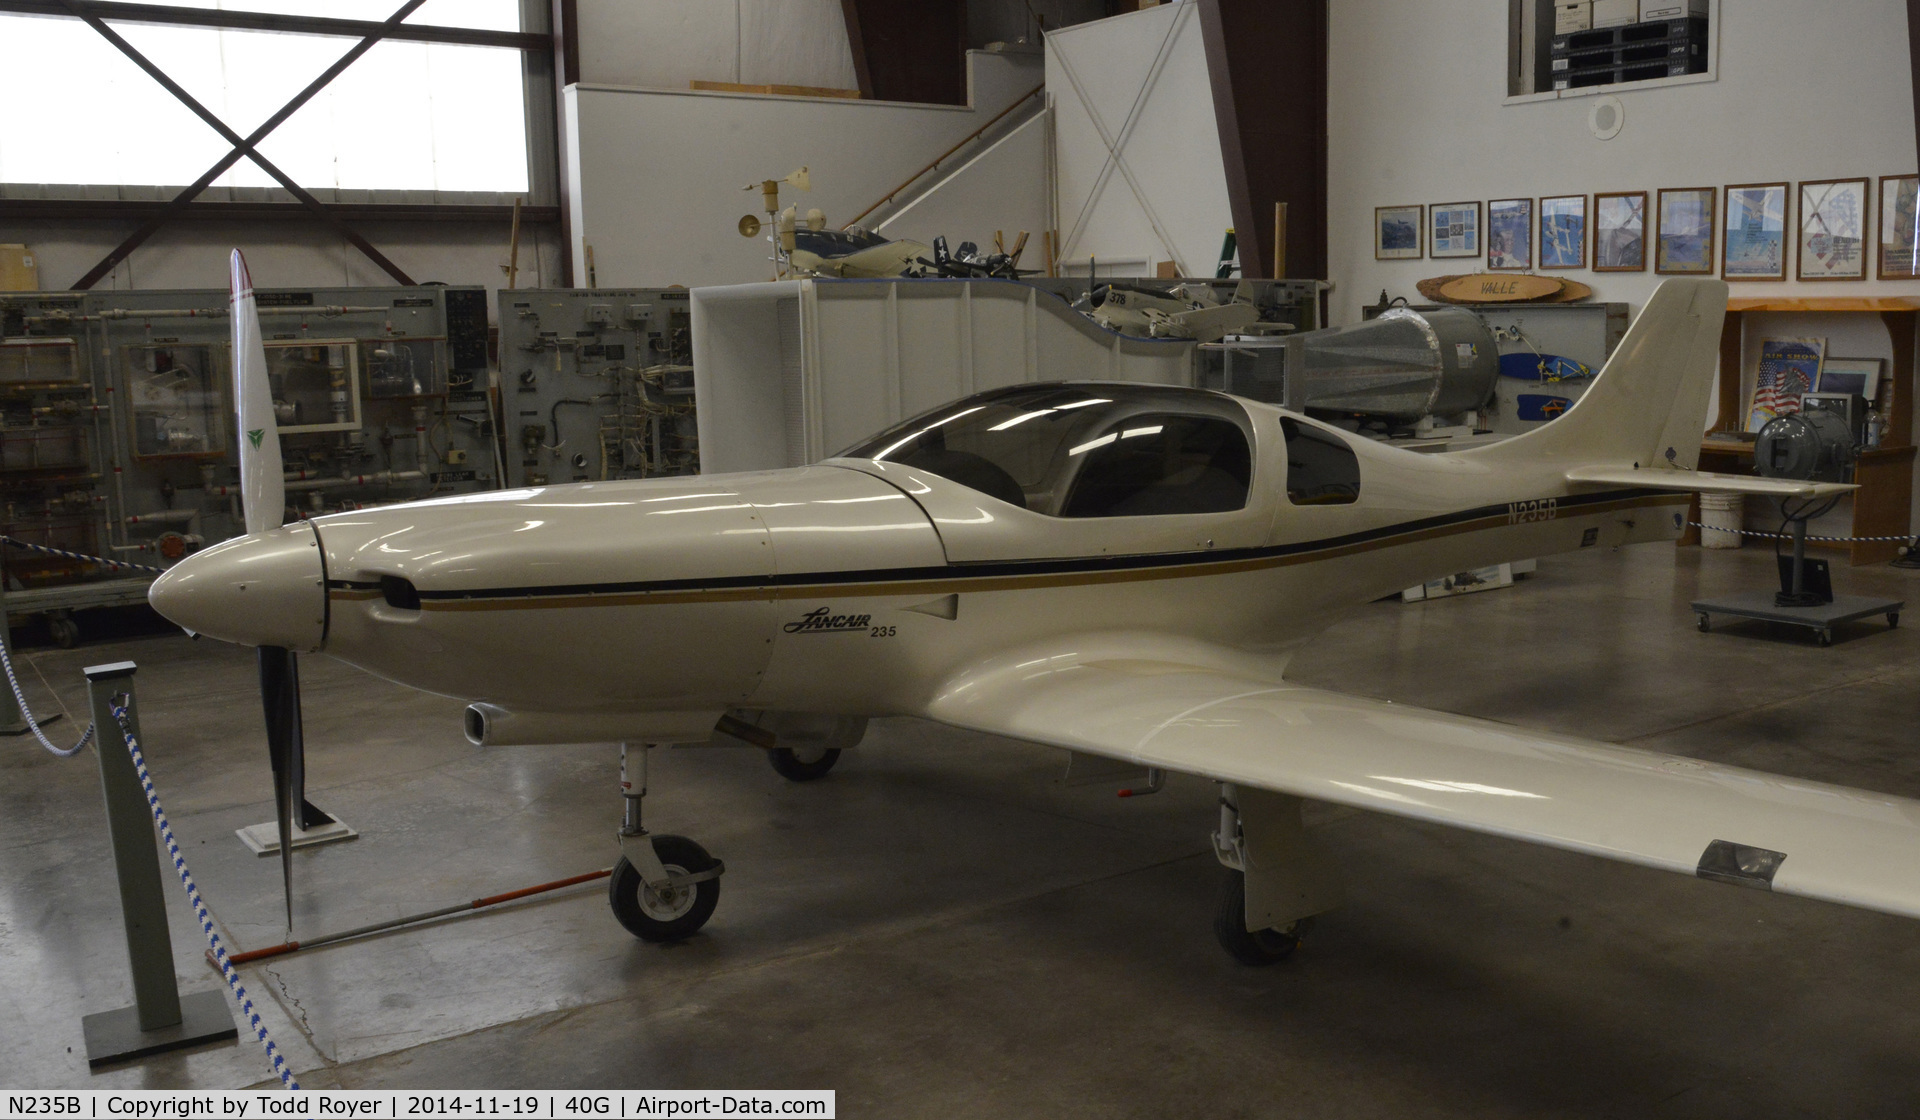 N235B, 1989 Lancair 235 C/N 39, On Display at the Planes of Fame Valle location